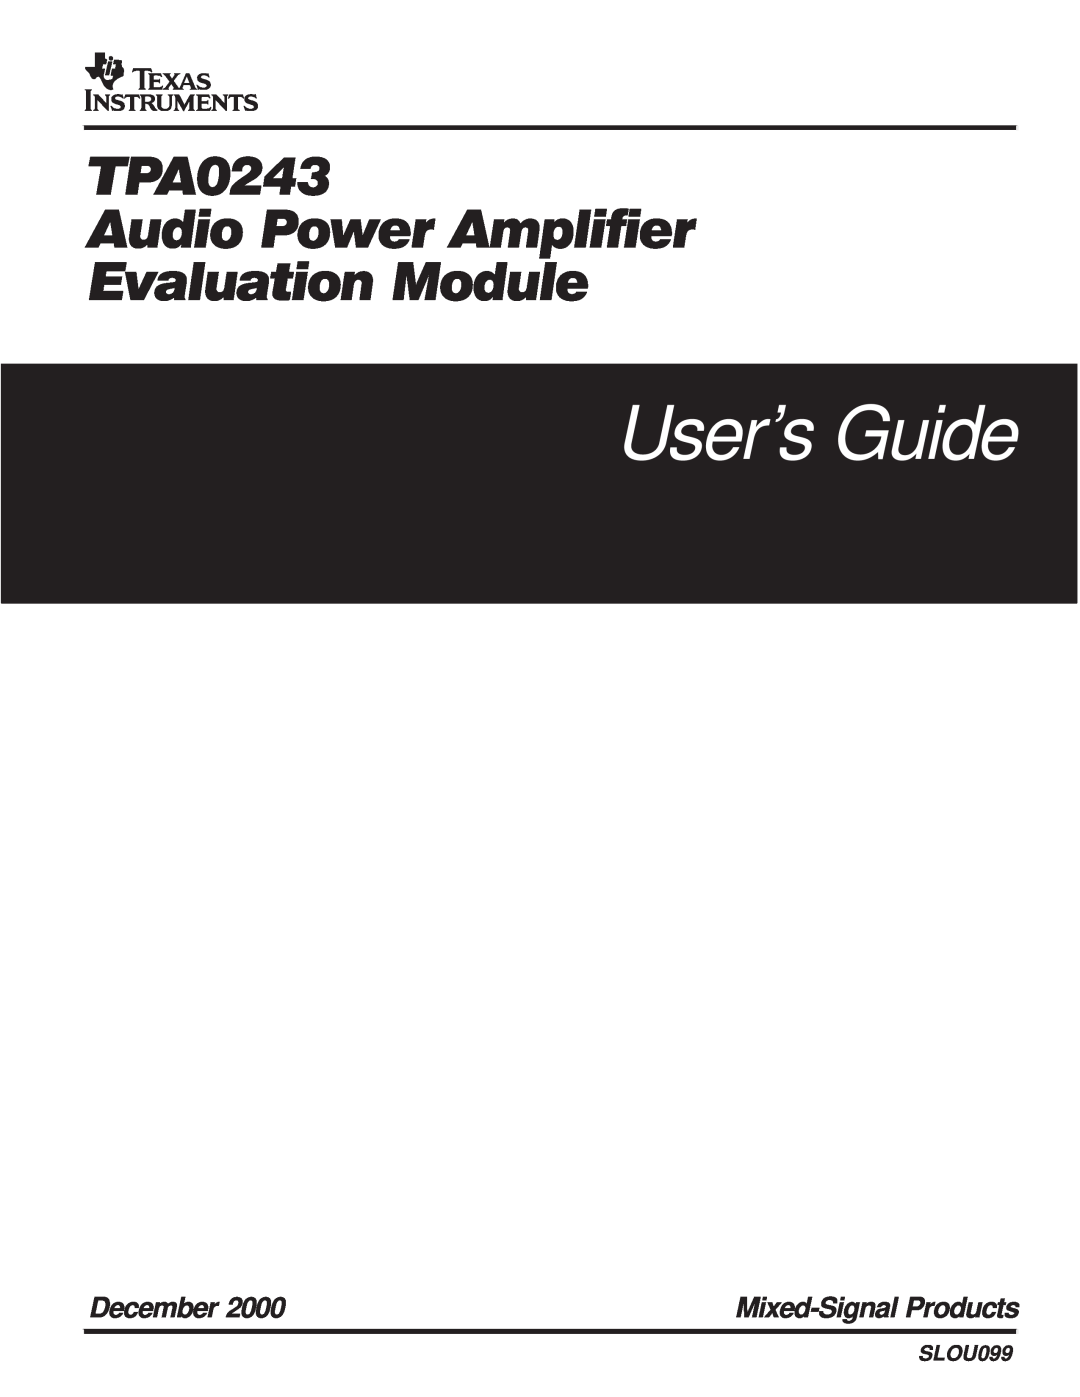 Texas Instruments TPA0243 manual Users Guide, TP Pe e e, December, Mixed-SignalProducts, SLOU099 